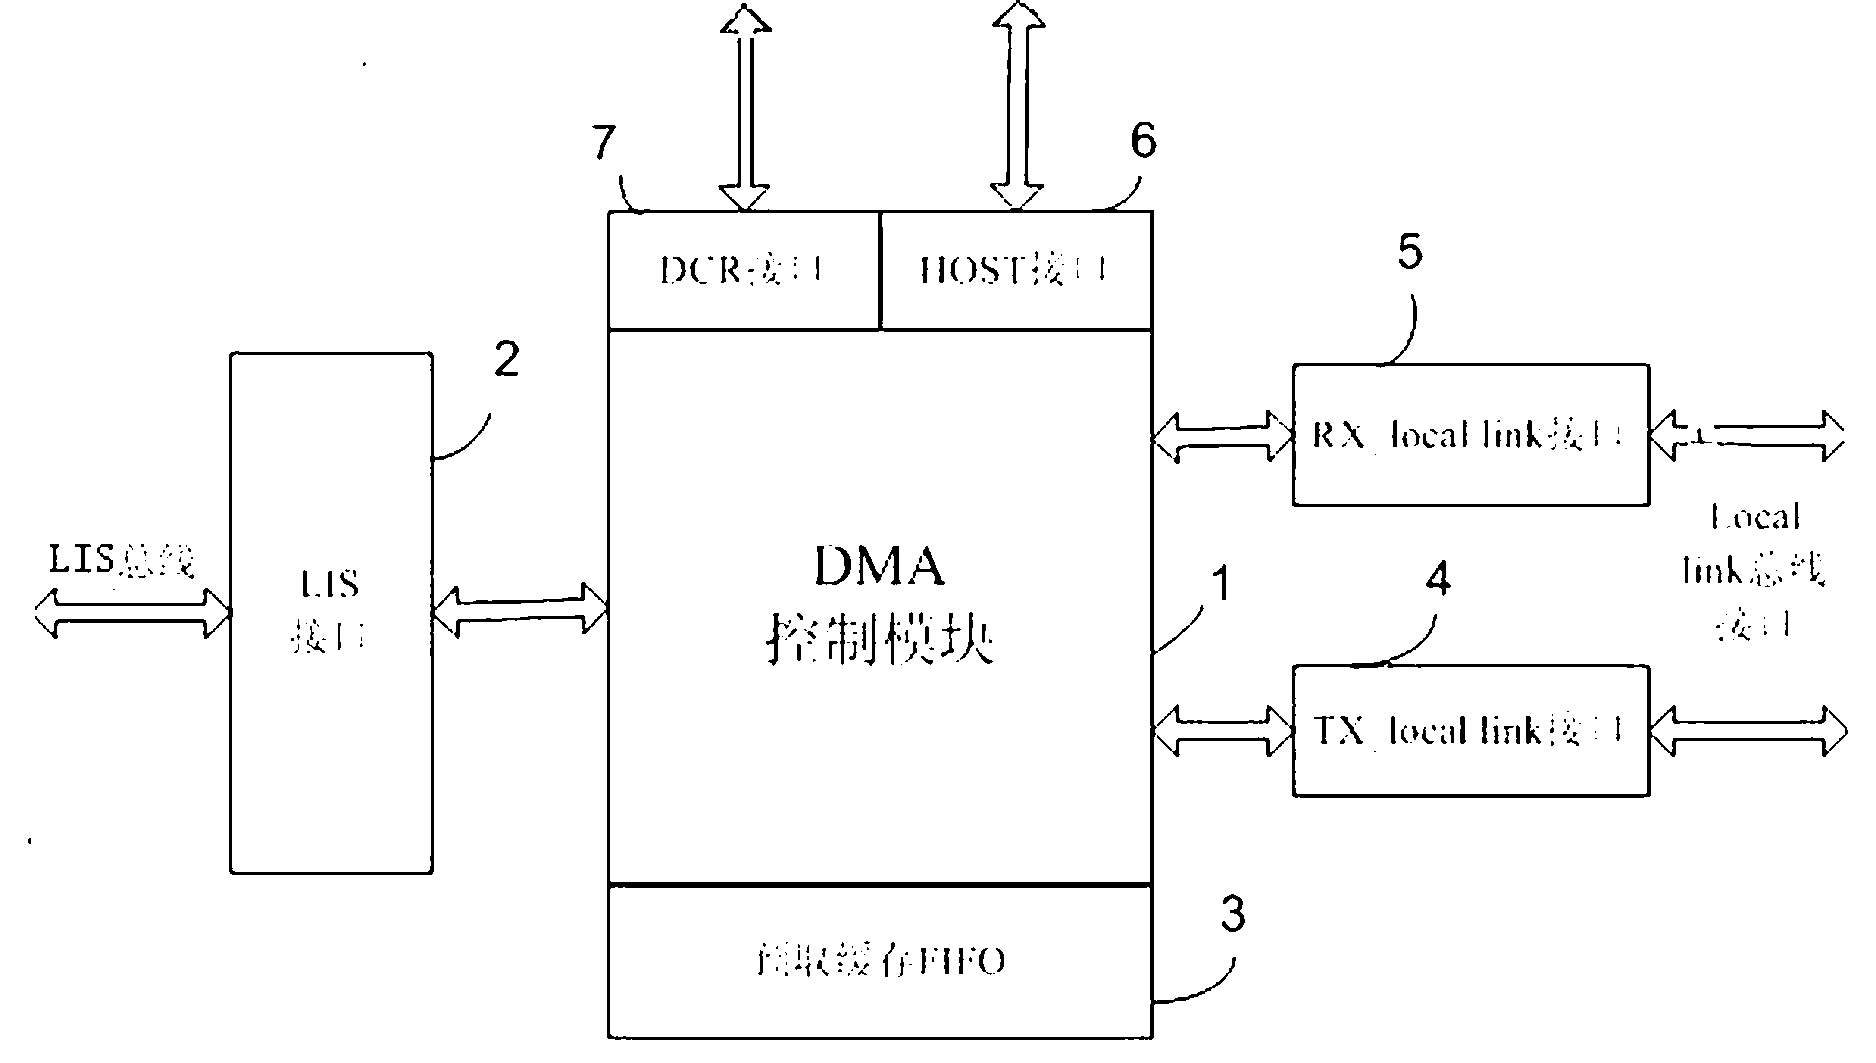 DMA (Direct Memory Access) address couple pre-reading method based on SATA (Serial Advanced Technology Attachment) controller